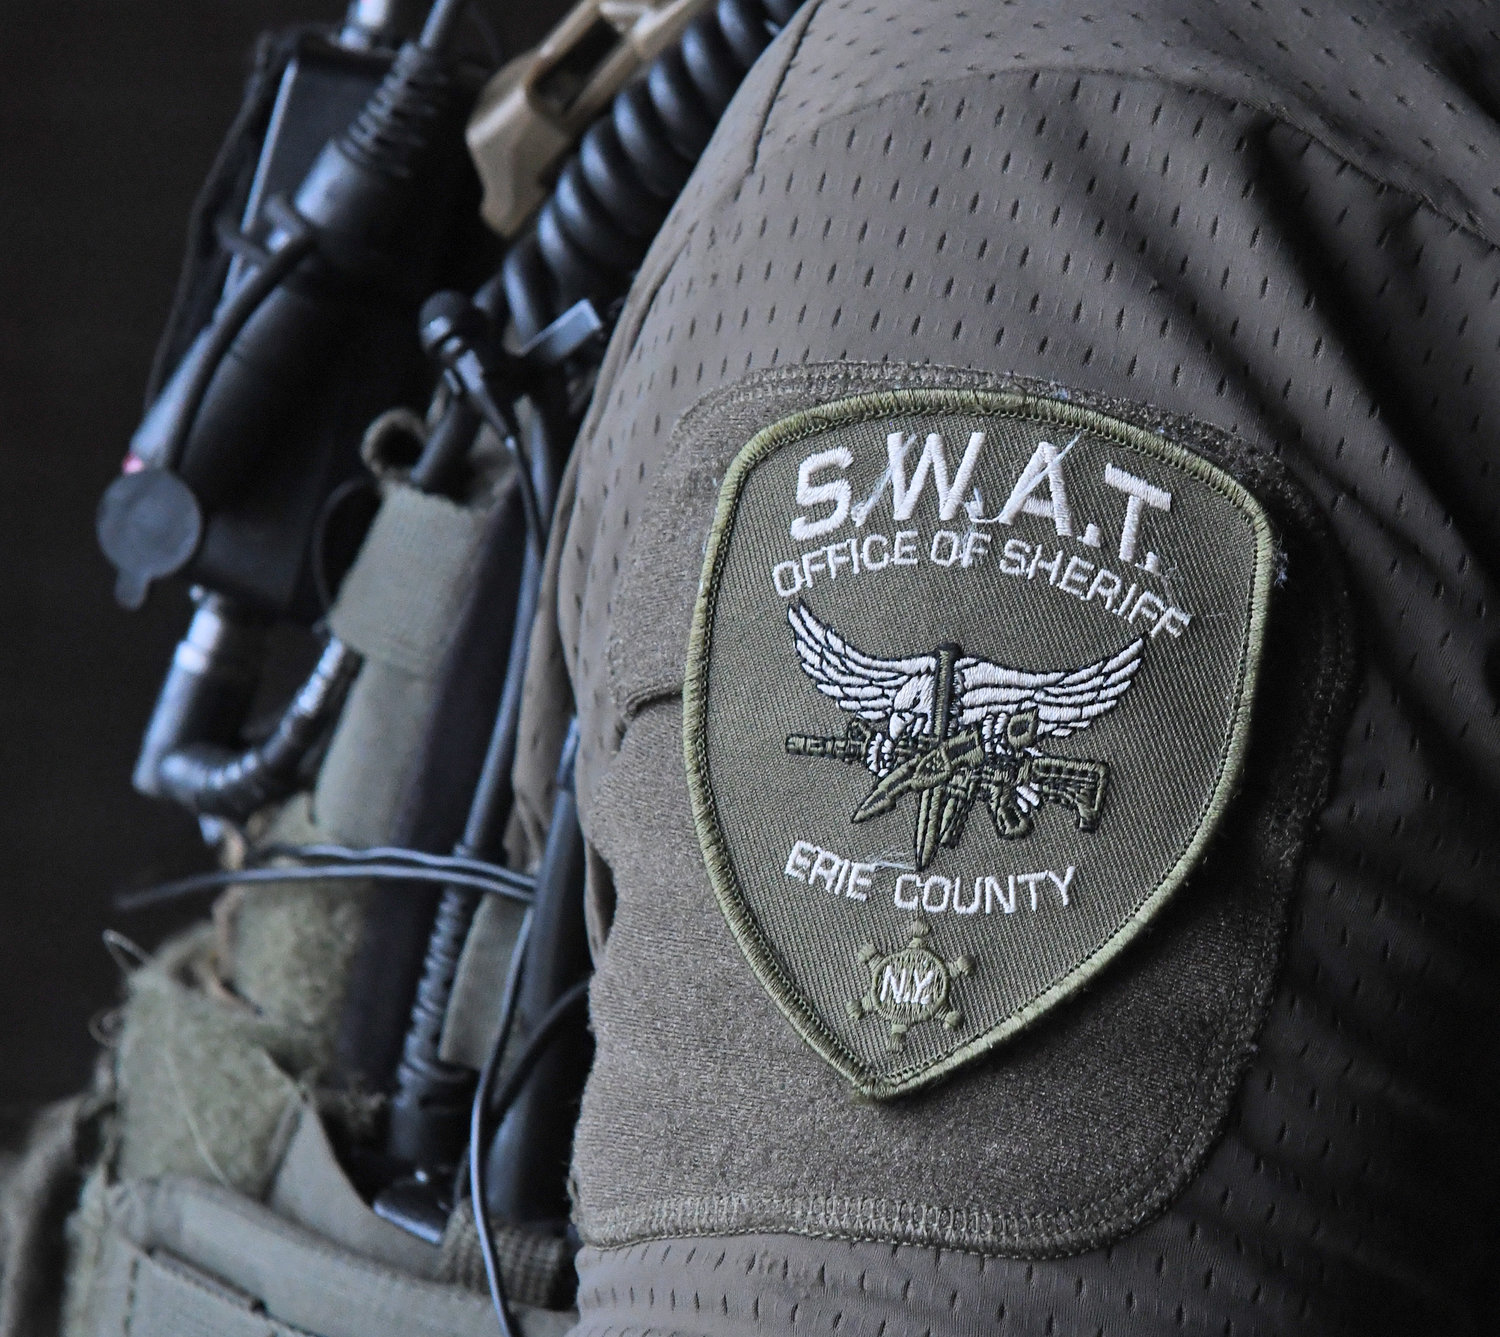 The SWAT team patch of the Erie County Sheriff's Office.